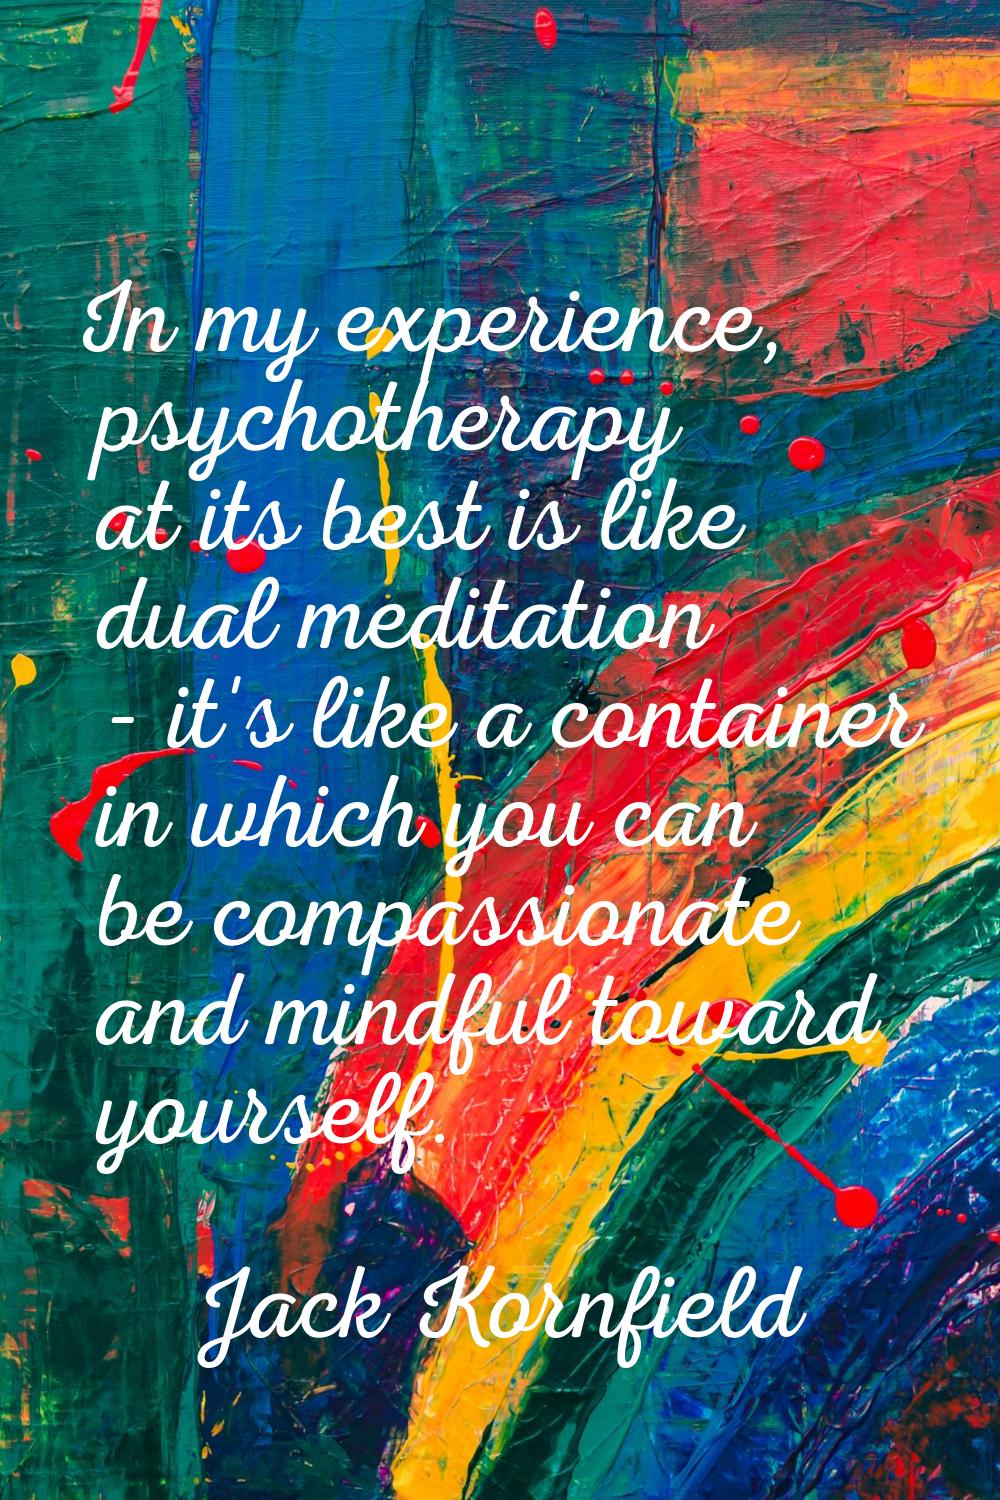 In my experience, psychotherapy at its best is like dual meditation - it's like a container in whic